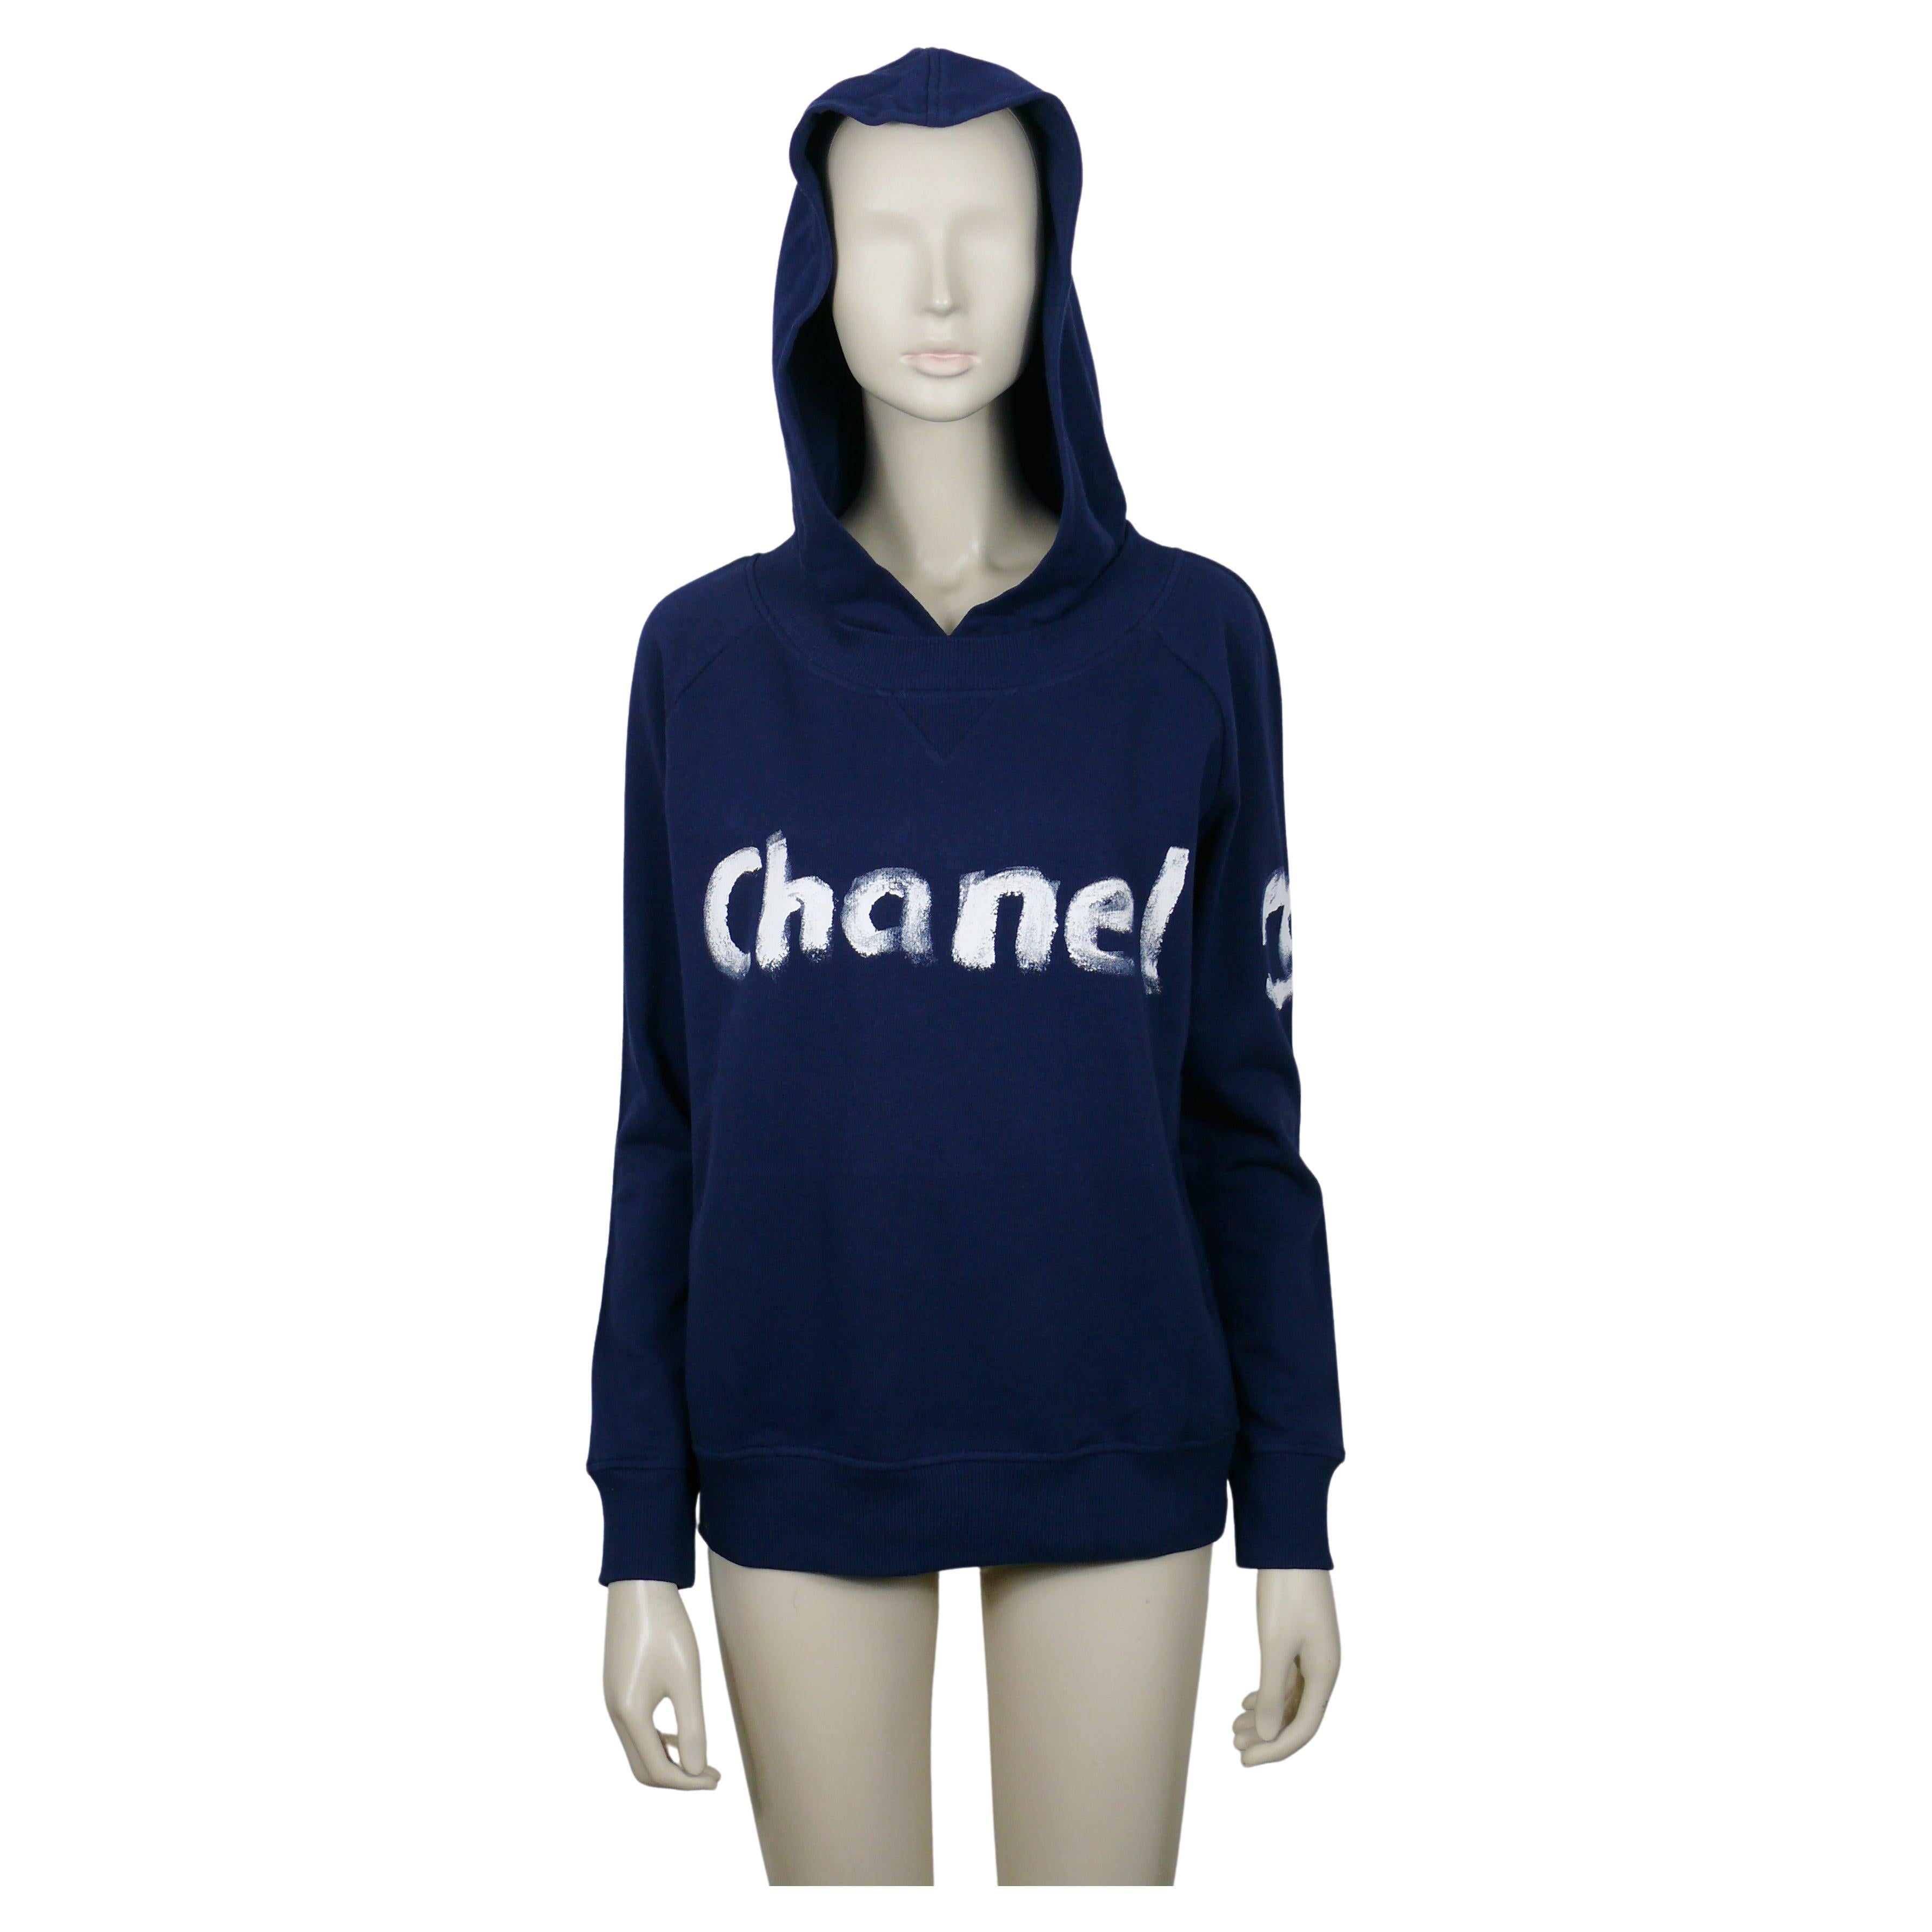 CHANEL Christmas 2013 VIPs Limited Edition Hooded Cotton